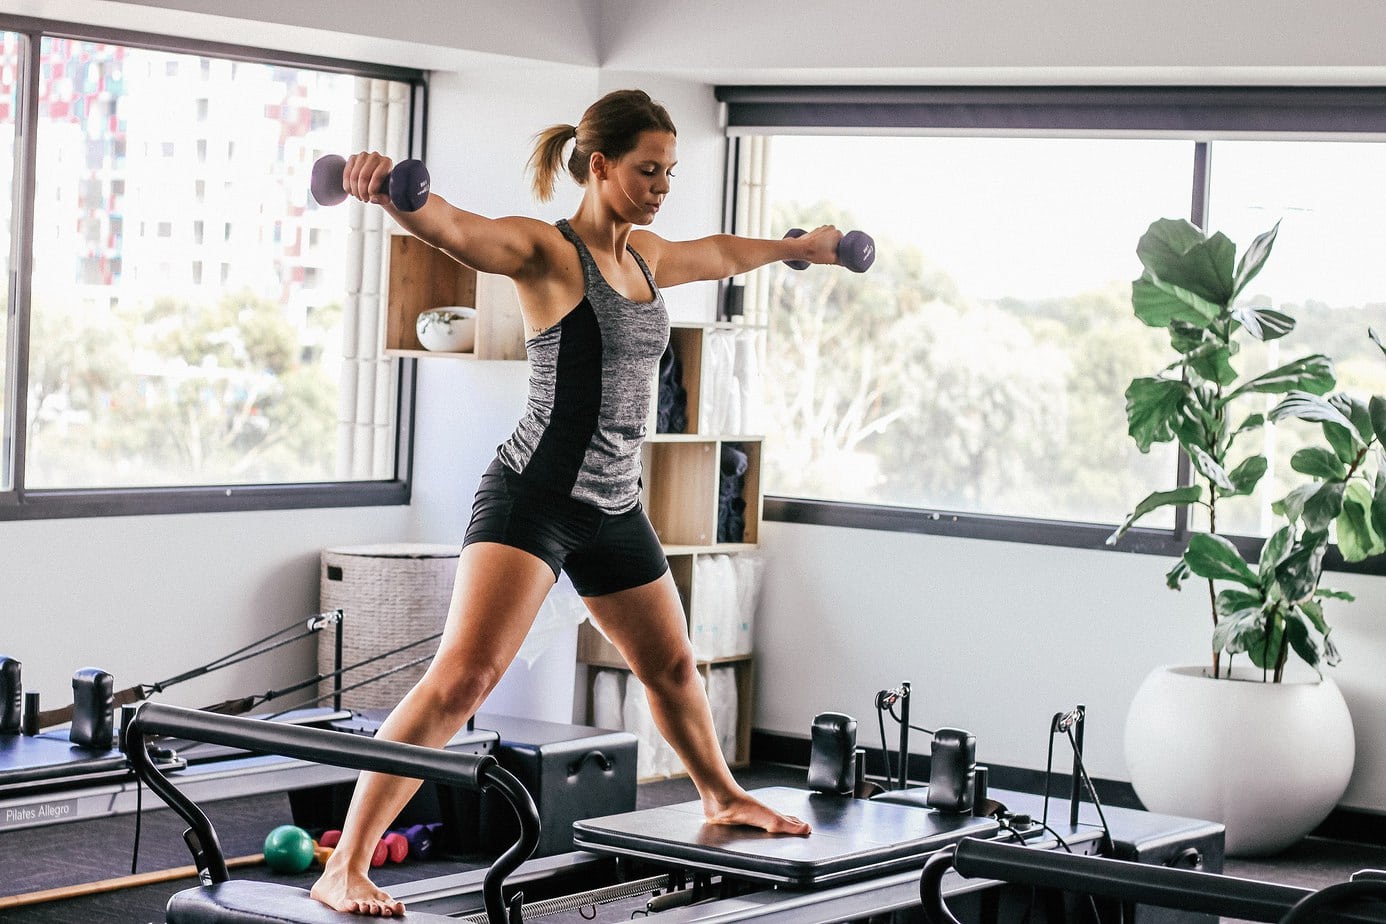 Pilates on machines – how does the exercise reformer work?